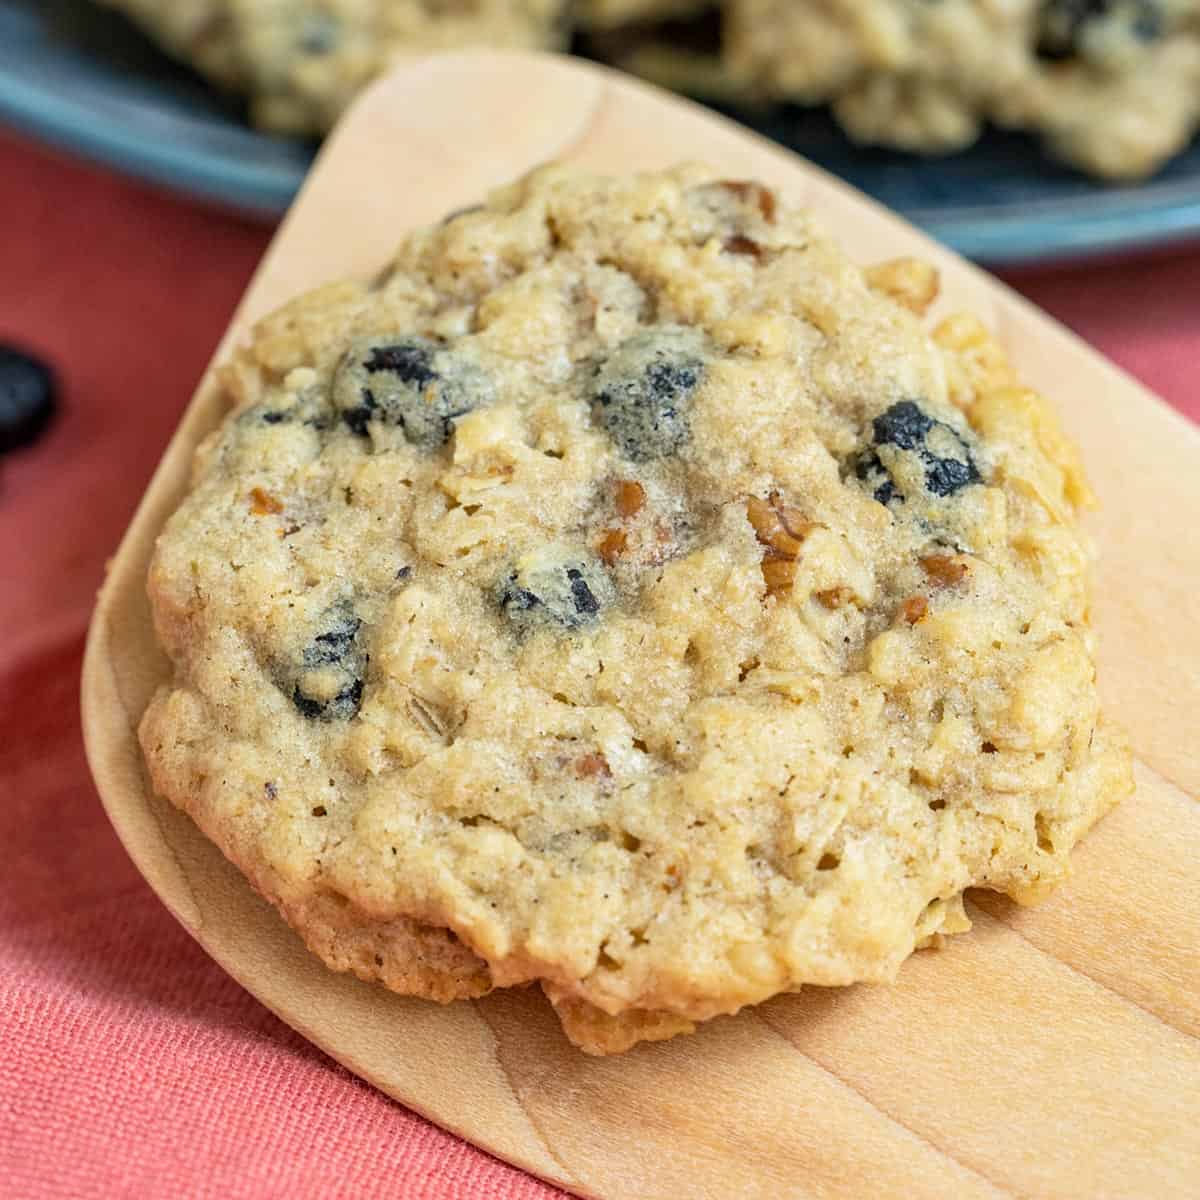 Blueberry with walnuts and cinnamon oatmeal cookie on a wooden spoon.